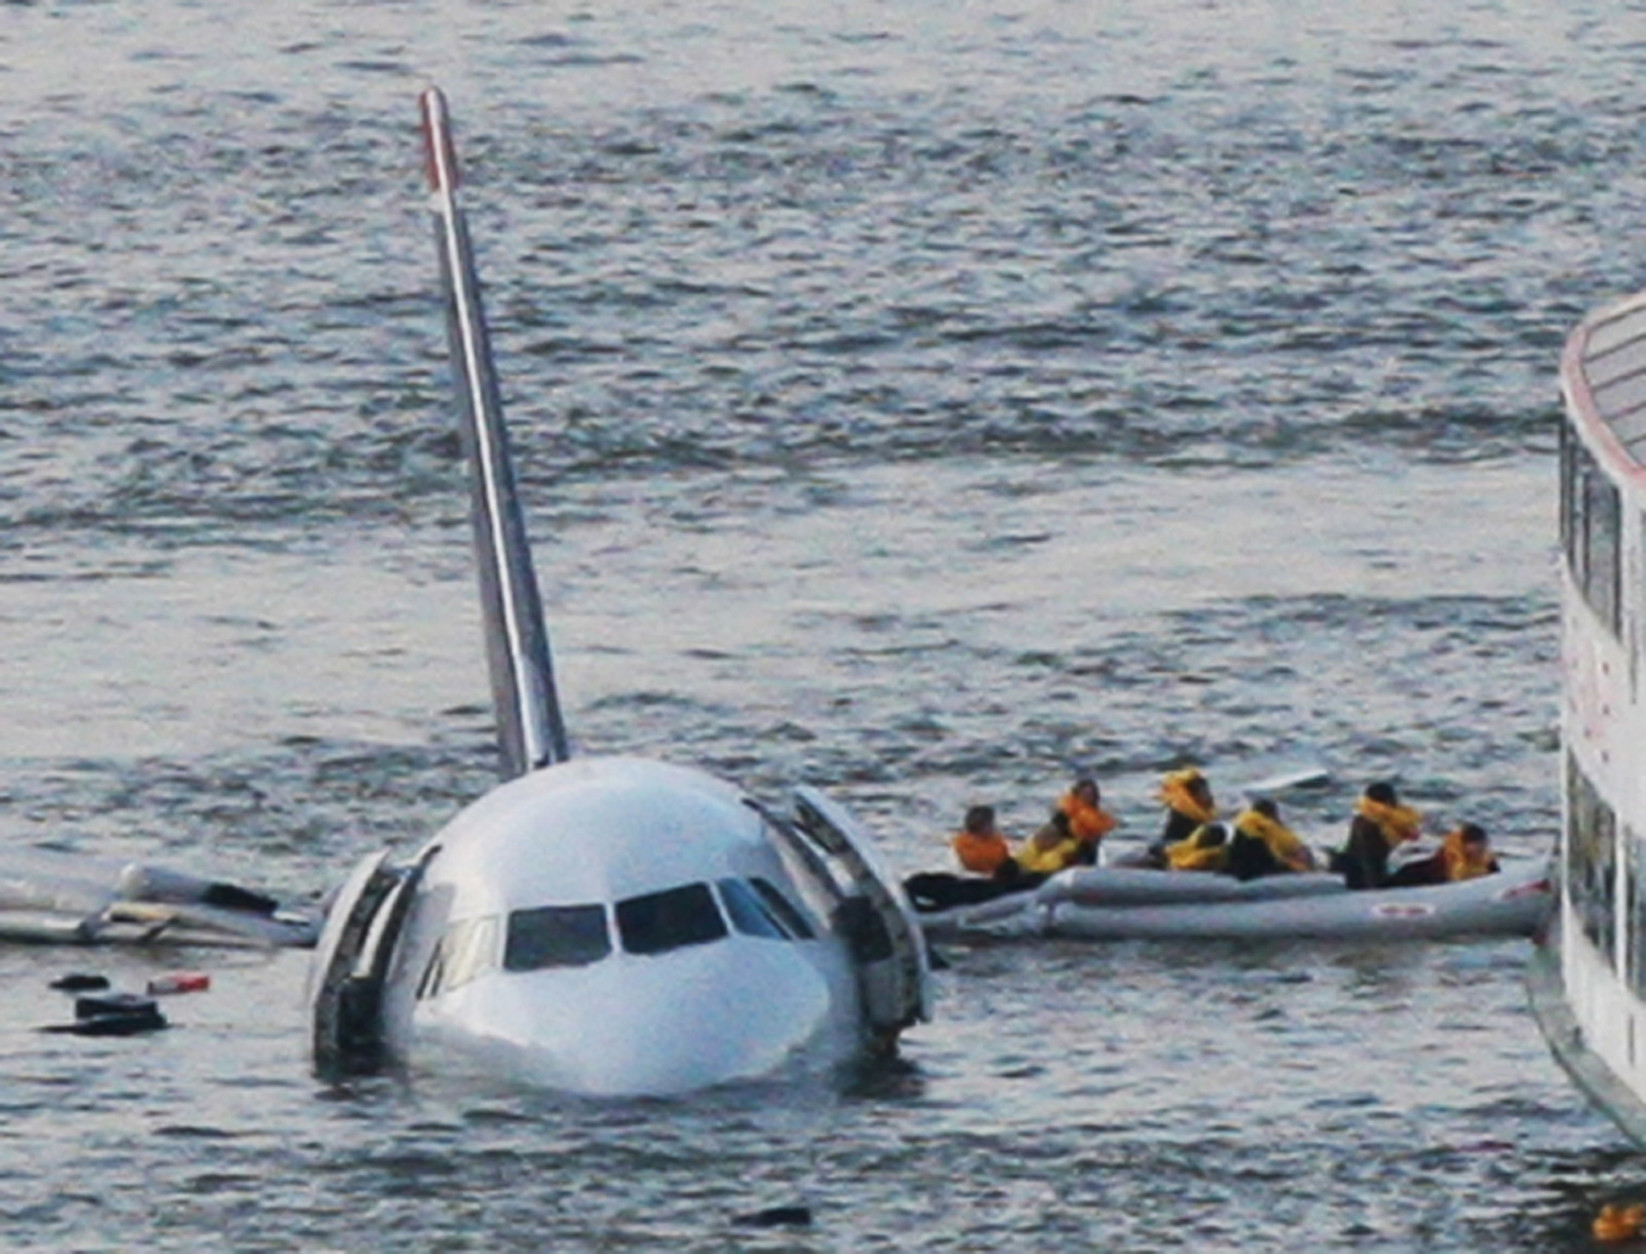 FILE - In this Jan. 15, 2009 file photo, passengers in an inflatable raft move away from US Airways Flight 1549 that went down in the Hudson River in New York. The jet ditched in the Hudson River after both engines failed when they ingested birds shortly after takeoff. All 155 people on board were safe; Captain Chesley Sullenberger and other crew members were hailed as heroes. (AP Photo/Bebeto Matthews, File)